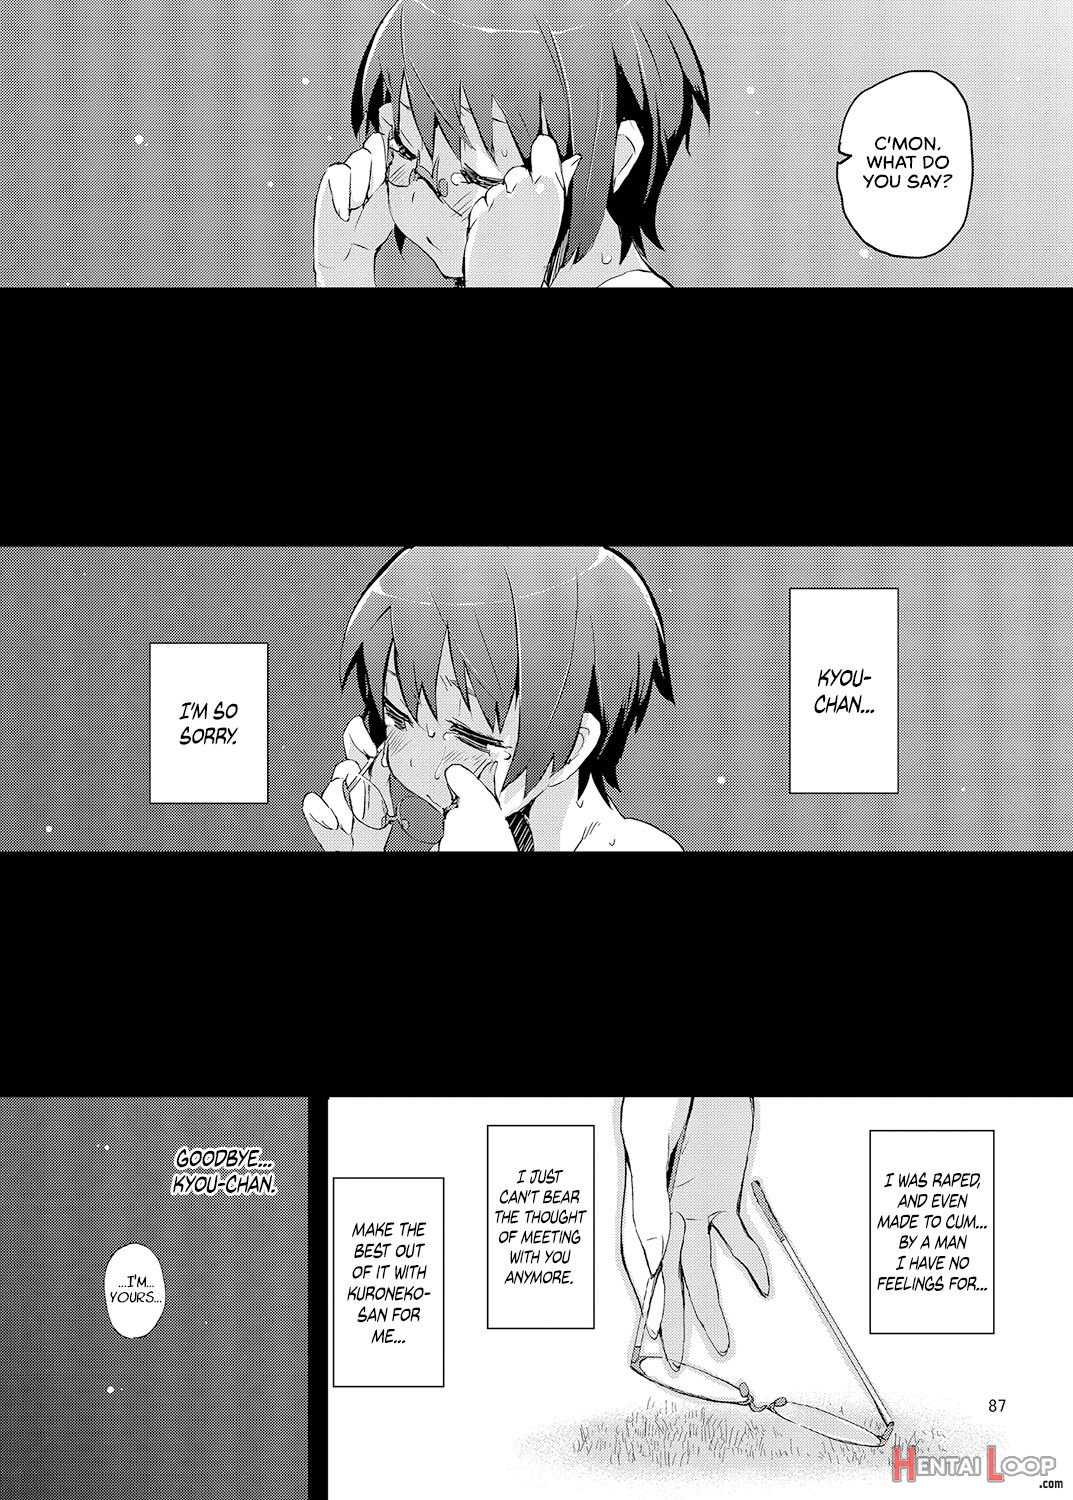 M- My Little Sister... She's... Revised Series Compilation page 89